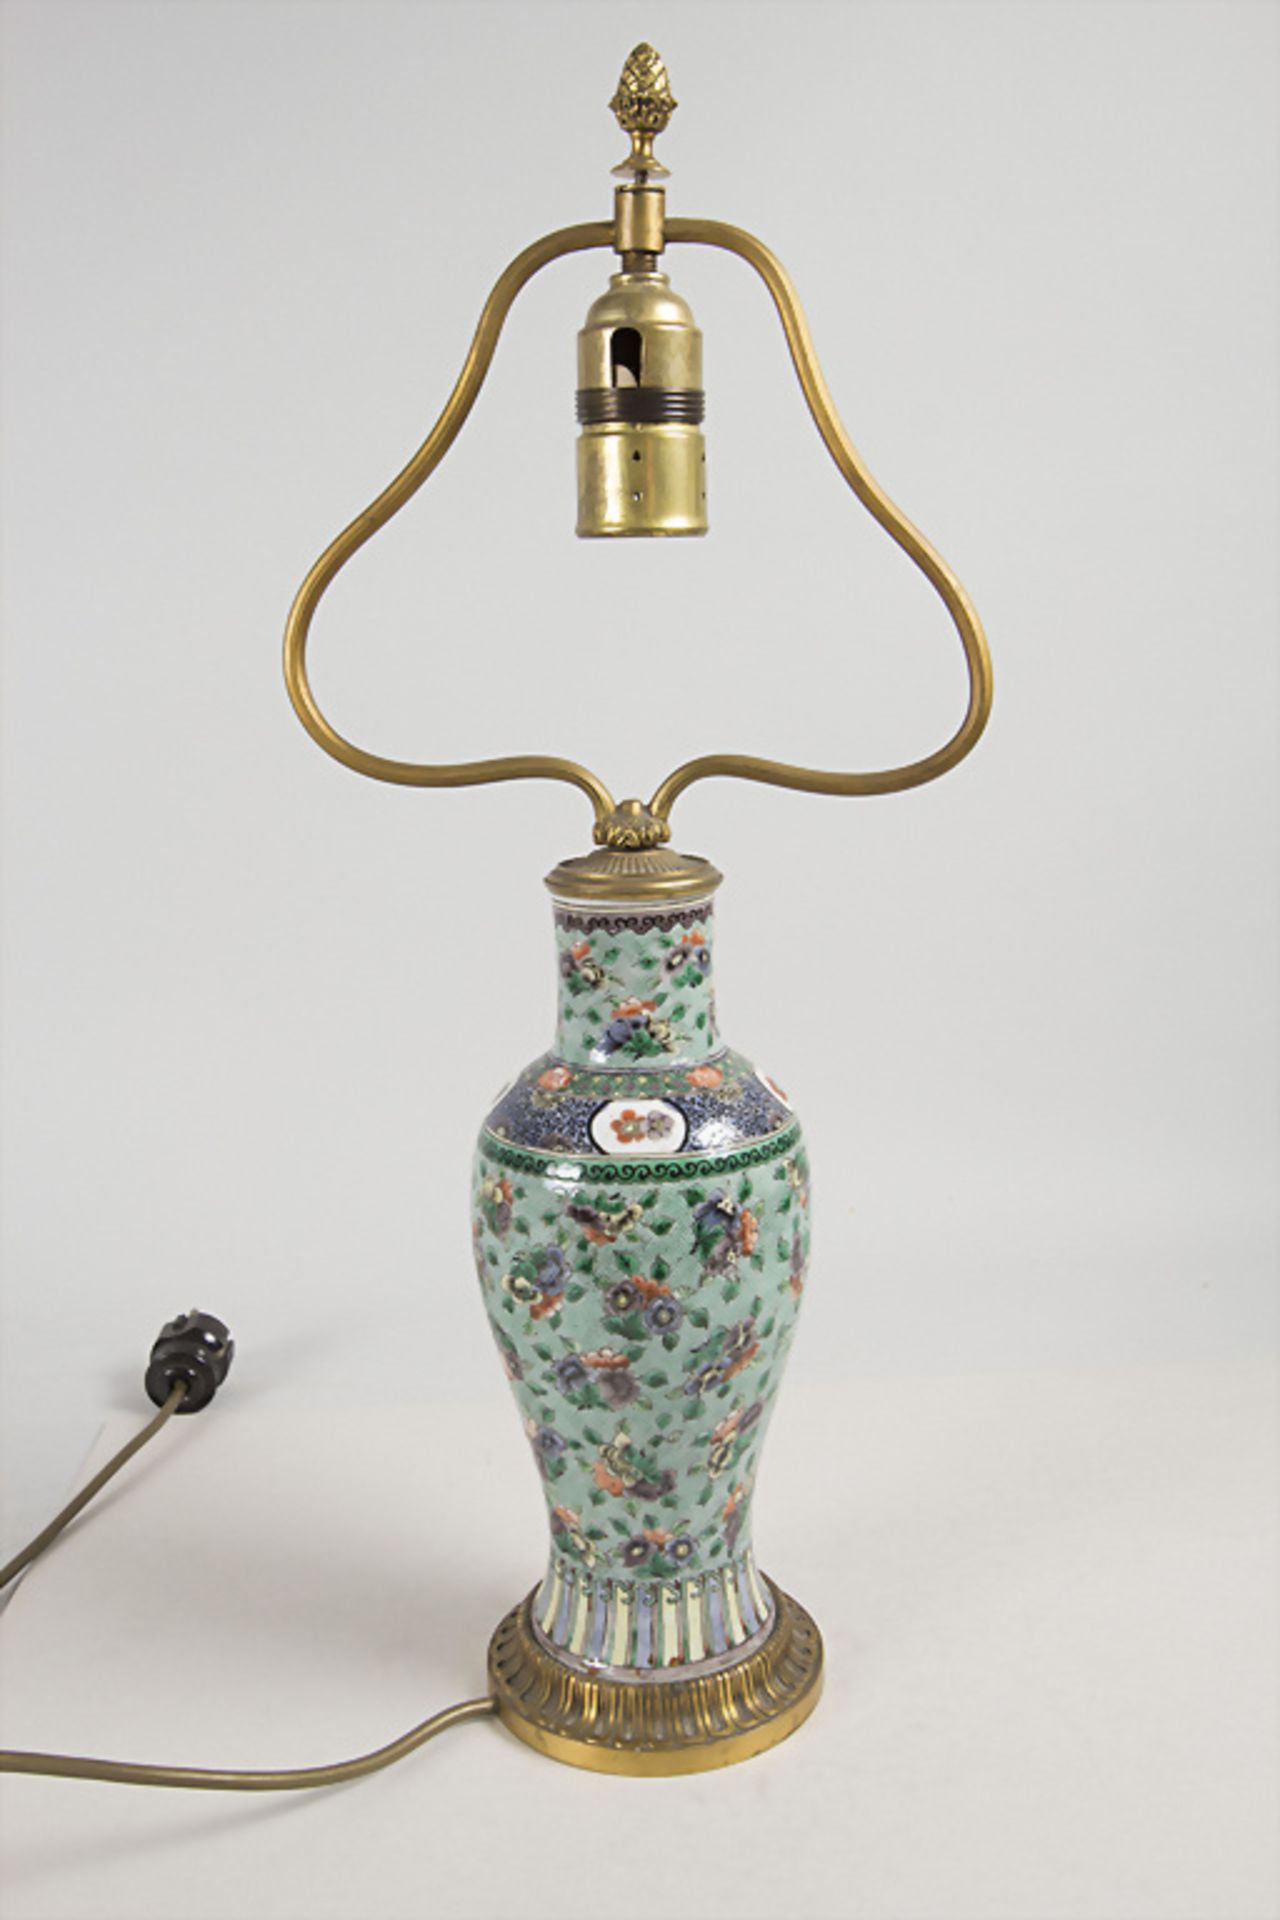 Tischlampe / A table lamp, Frankreich bzw. China, um 1900, Vase 18./19. Jh. - Image 3 of 6